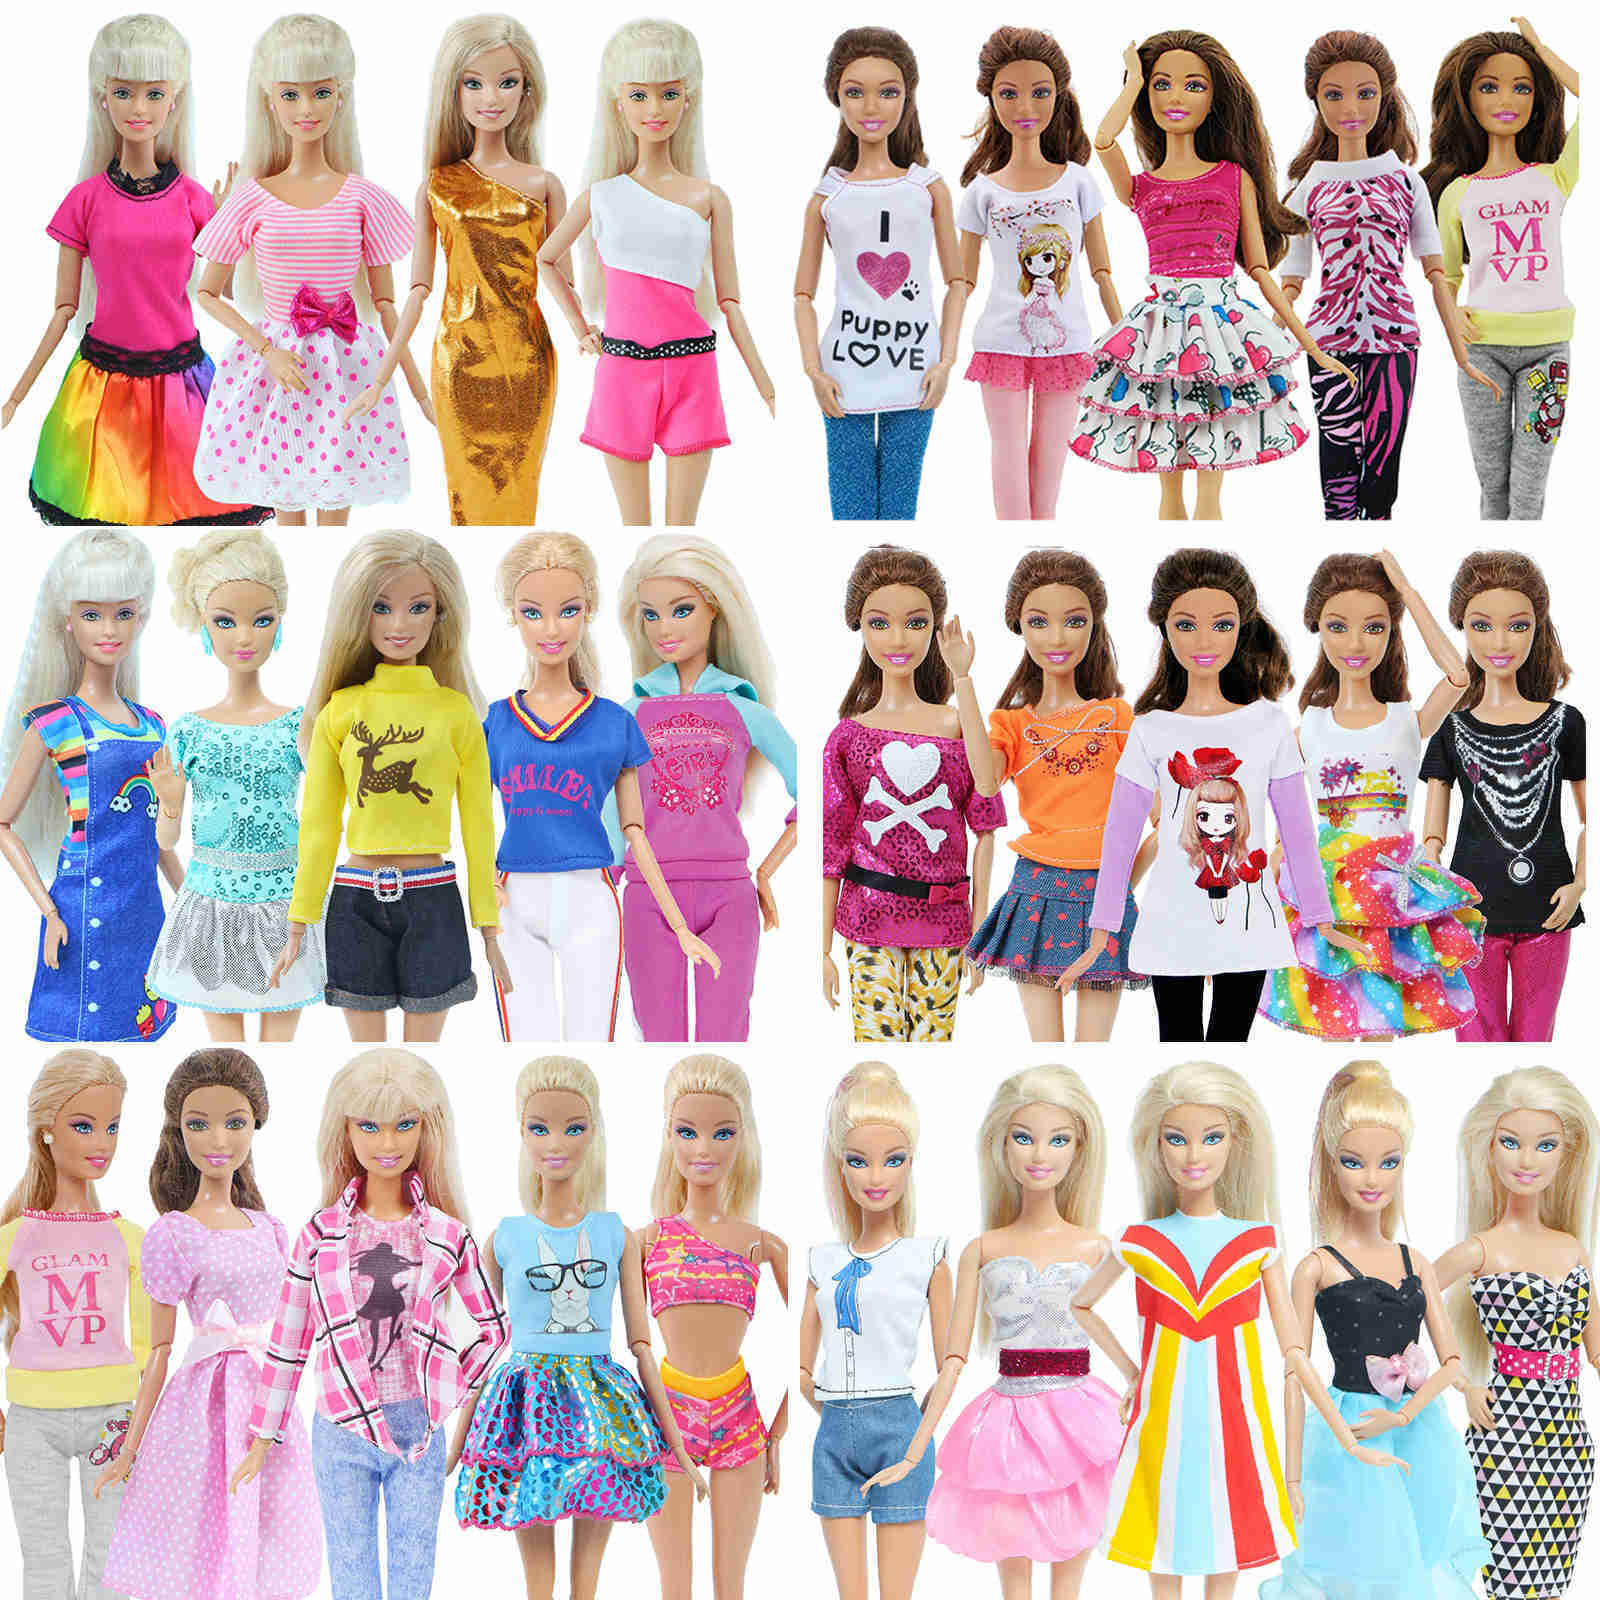 

Wholesale 5 Pcs Fashion Daily Wear Casual Outfits Vest Shirt Skirt Pants Dress Dollhouse Accessories Clothes For Barbie Doll Apparel